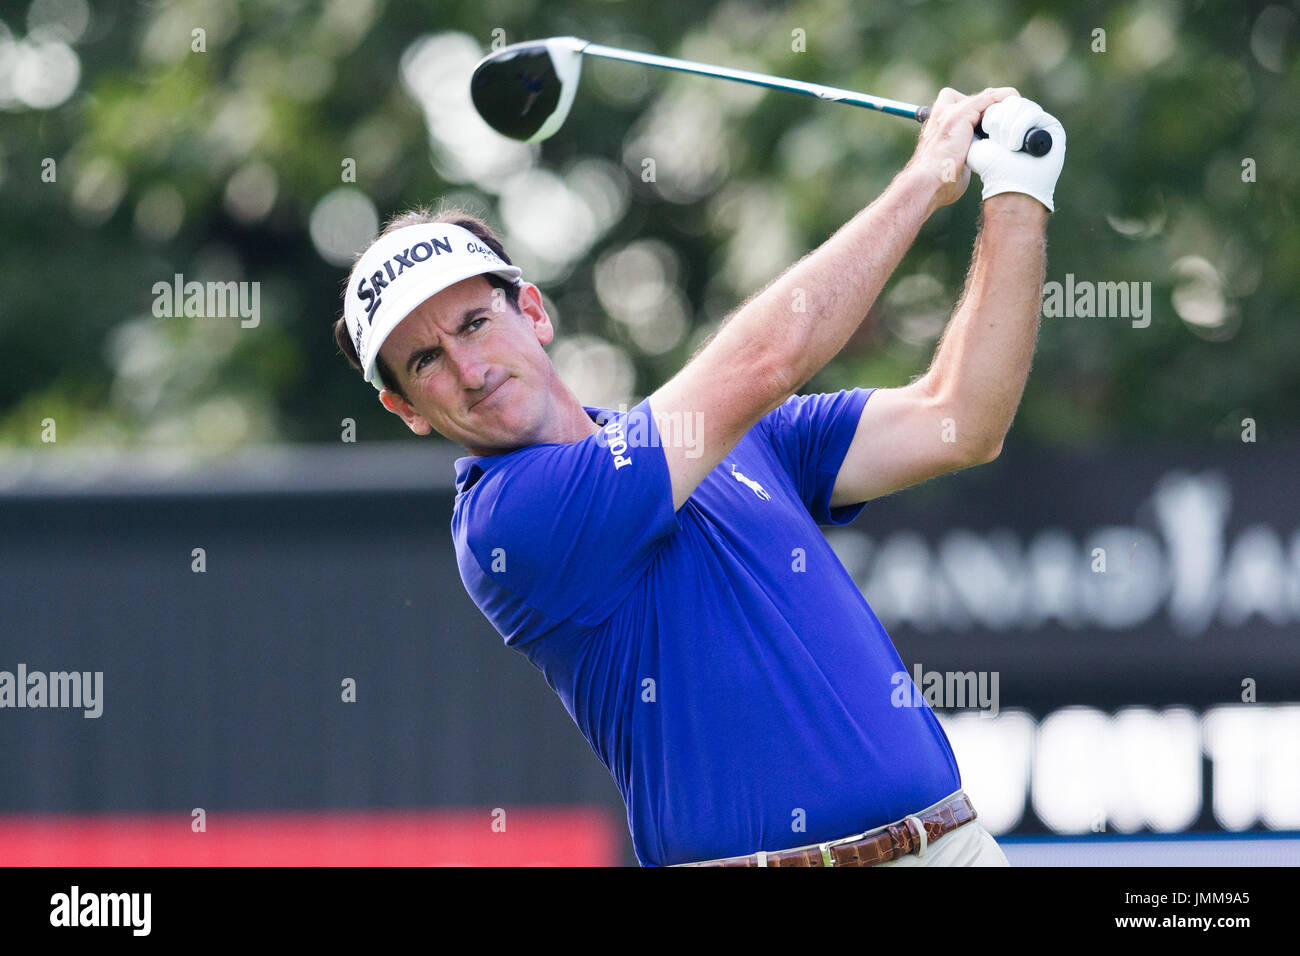 Oakville, Ontario, Canada. 27th July, 2017. Gonzalo Fdez-Castano reacts during the opening round action of the RBC Canadian Open at Glen Abbey Golf Club in Oakville, Ontario, Canada. Daniel Lea/CSM/Alamy Live News Stock Photo